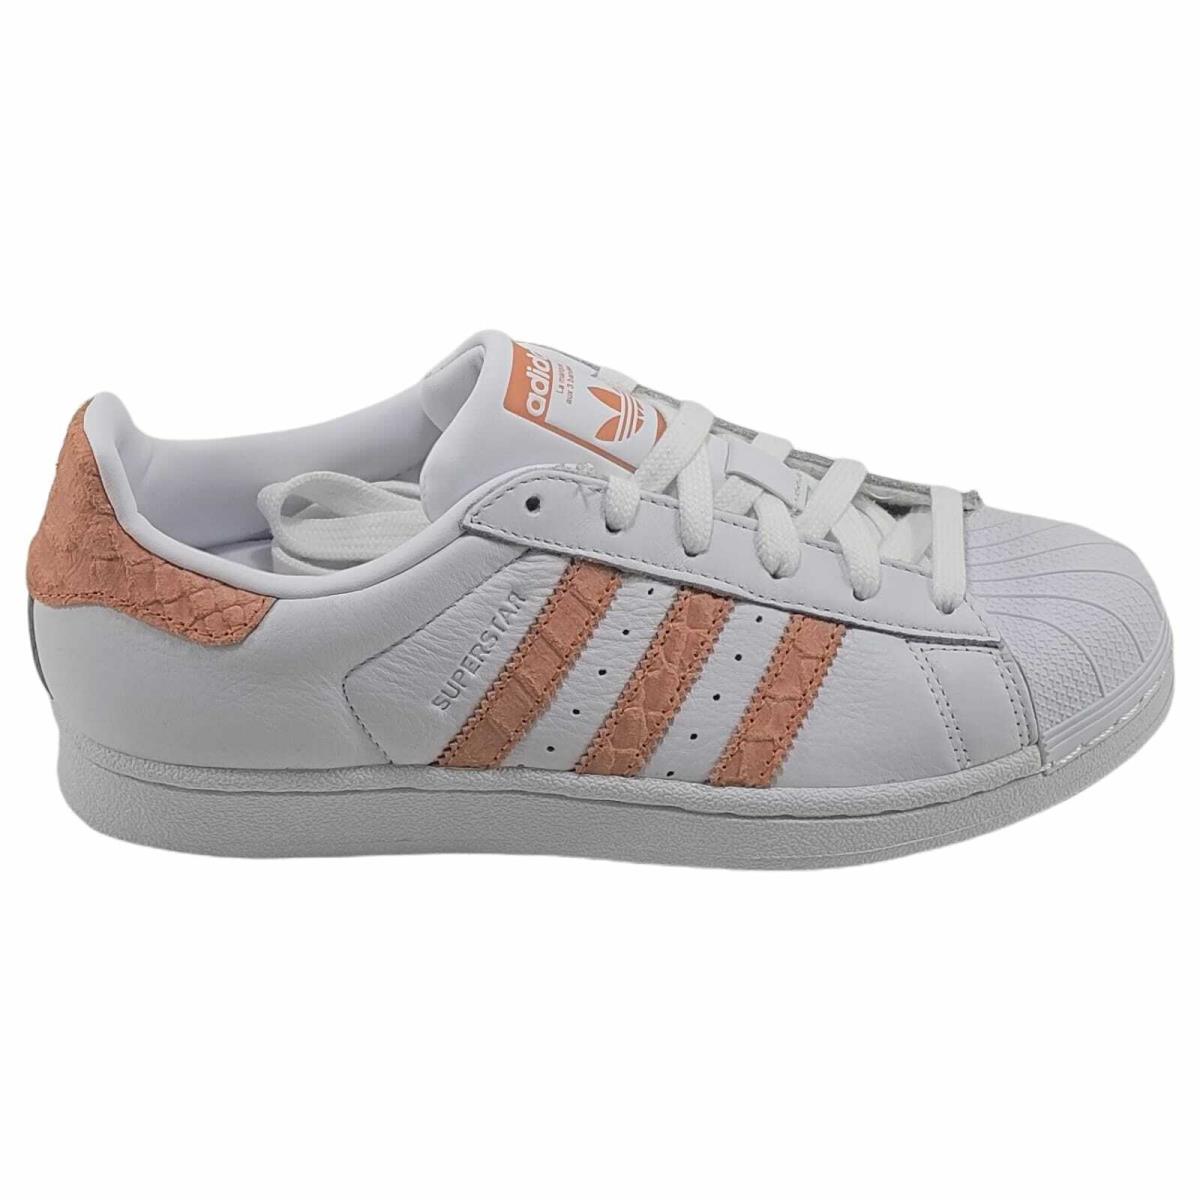 Adidas Superstar W CG5462 Womens Shoes White Chacor Leather Sneaker Size 7